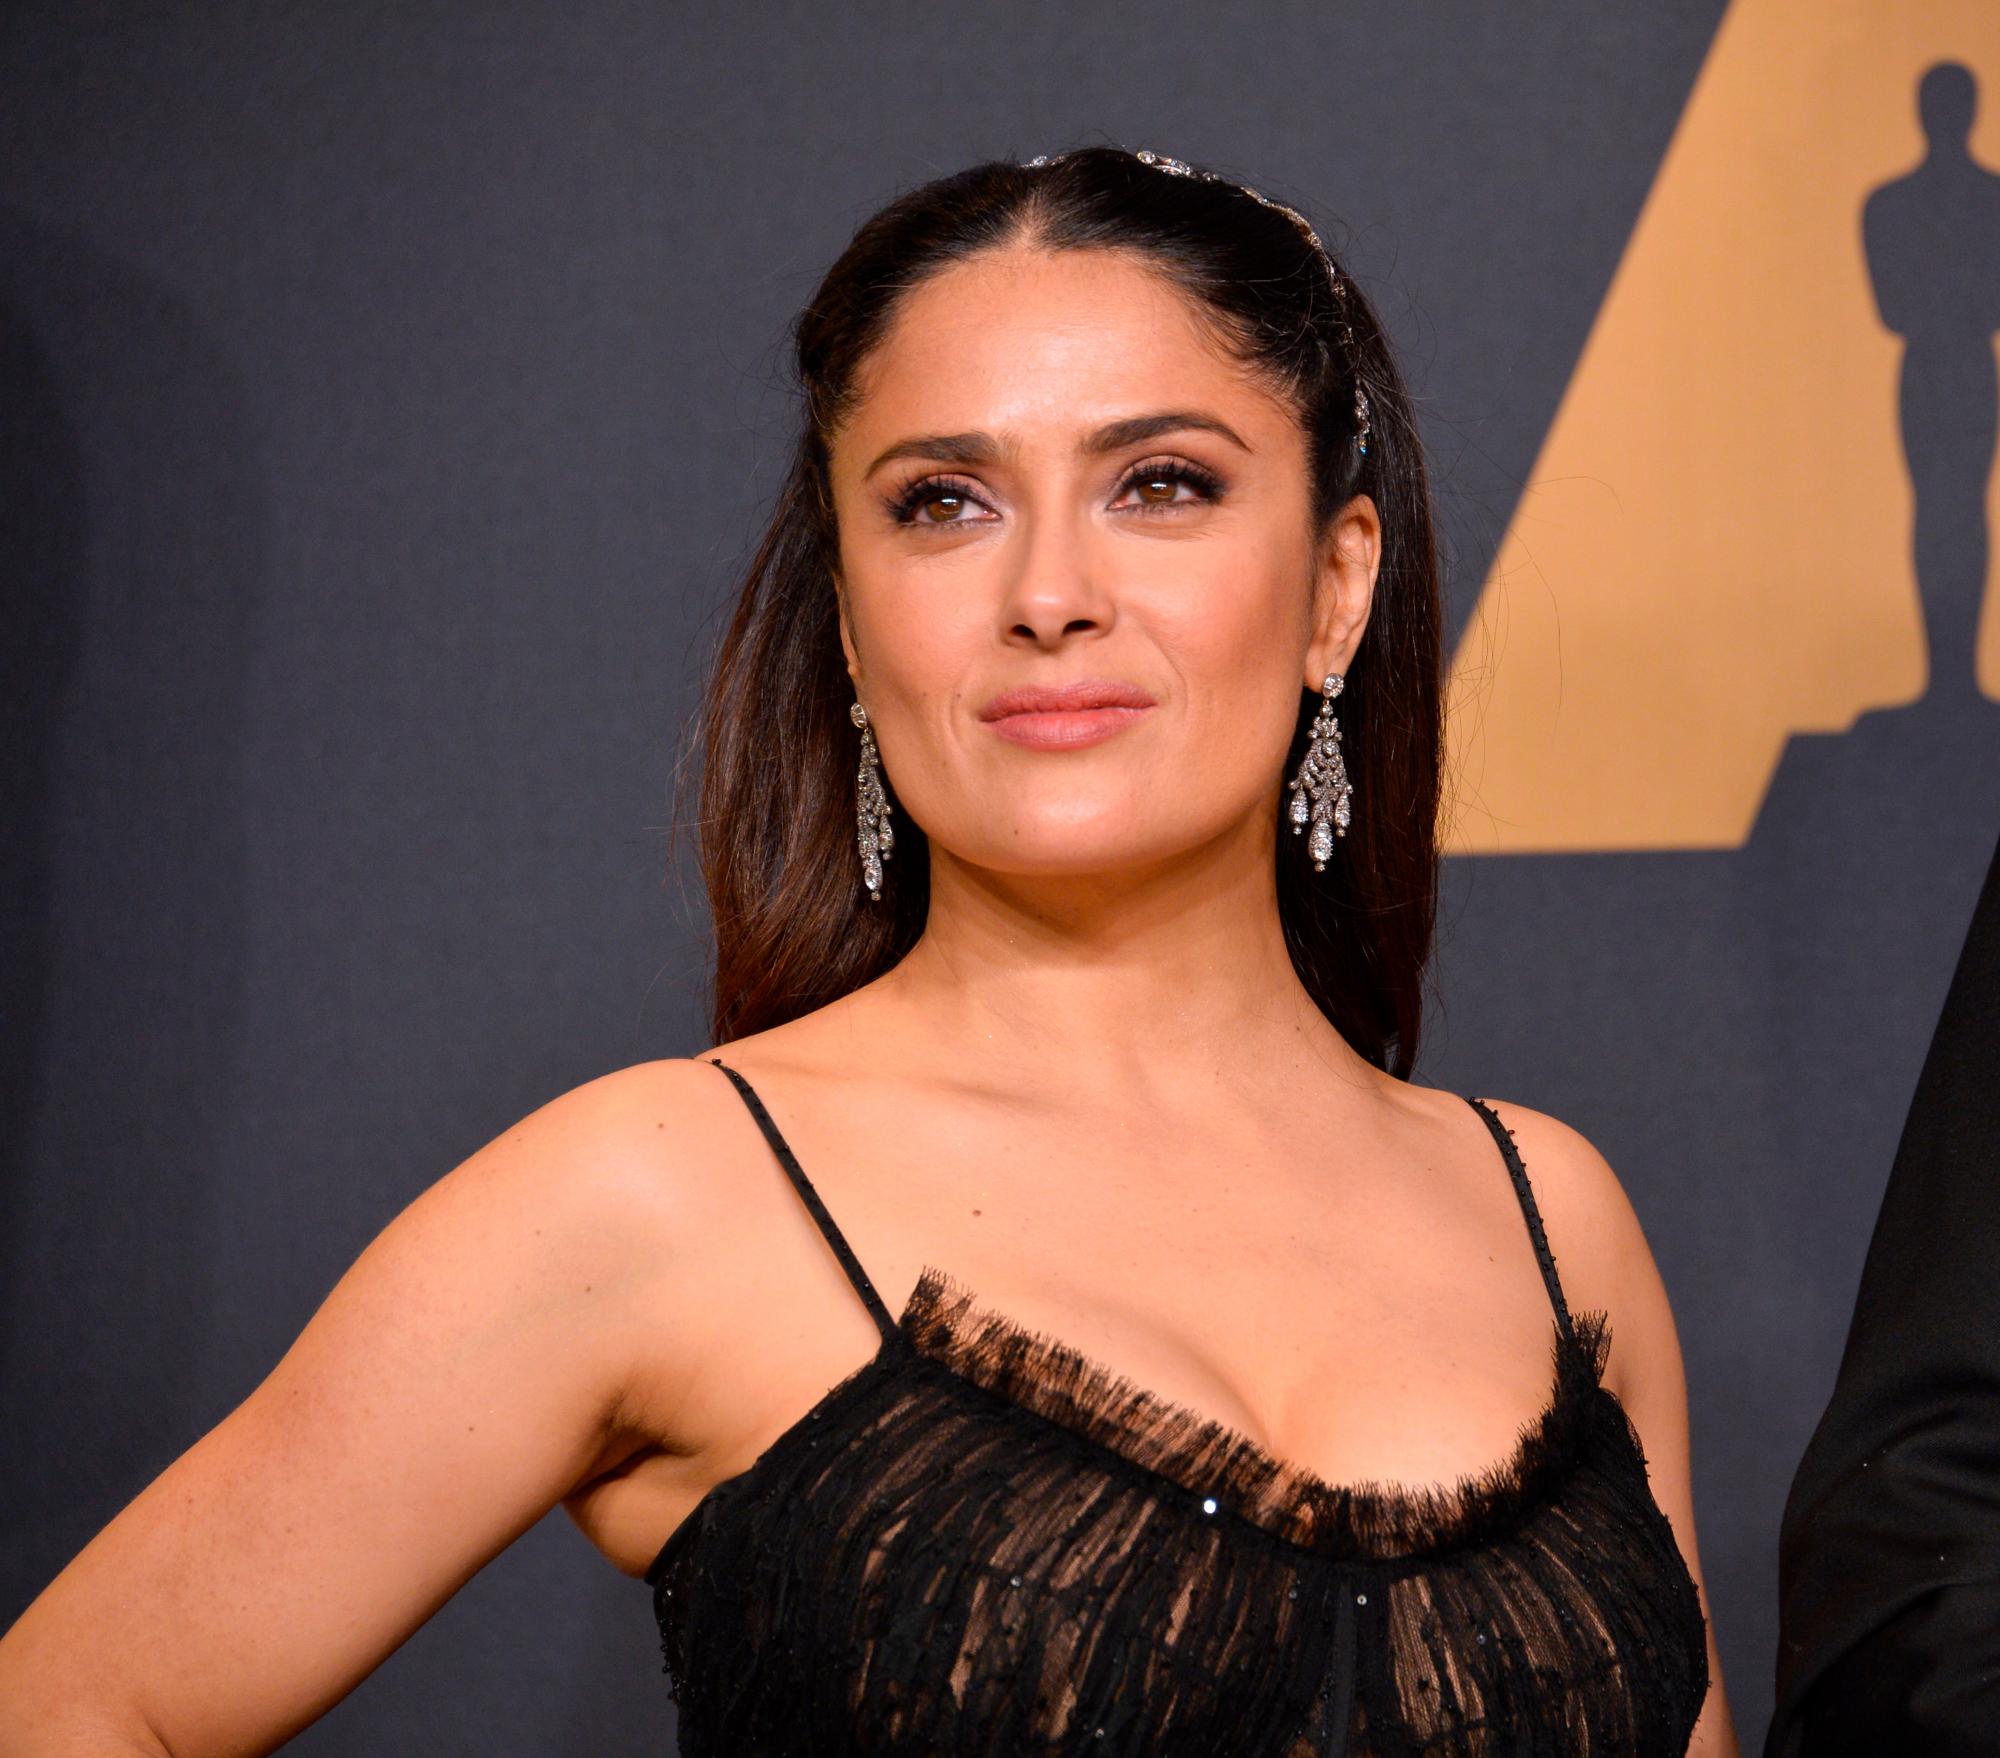 From the age of 12 to over 50, Salma Hayek suffers from this complicated disorder